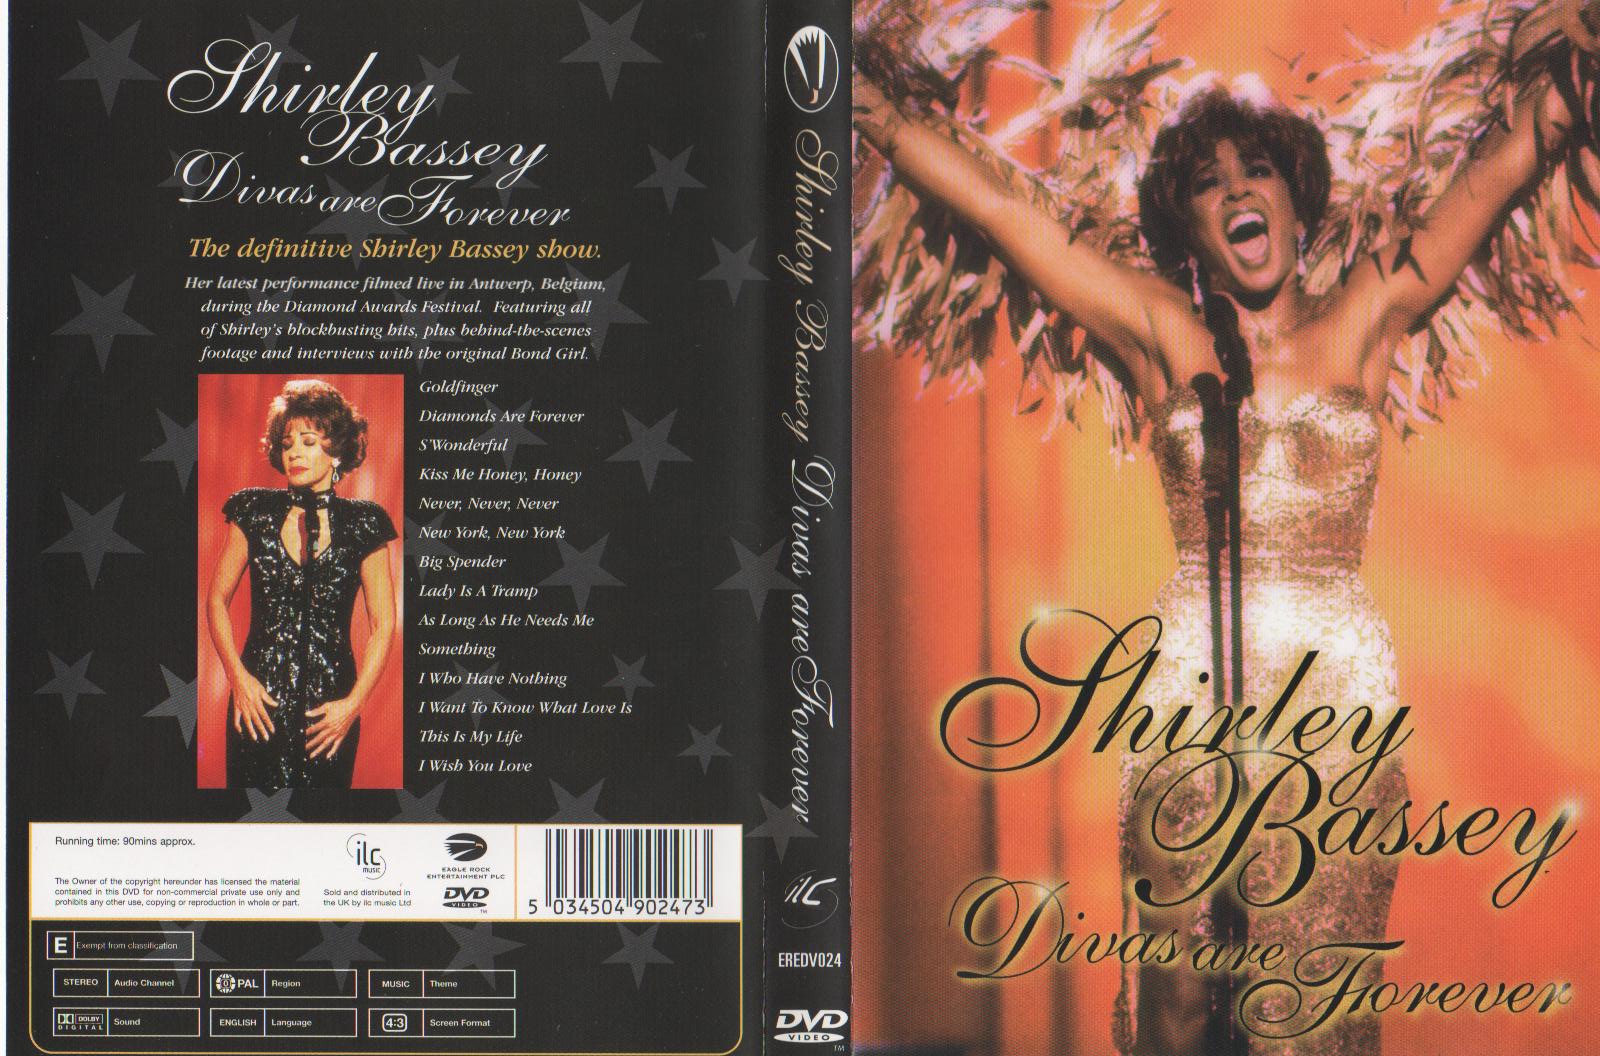 Jaquette DVD Shirley Bassey Divas are Forever